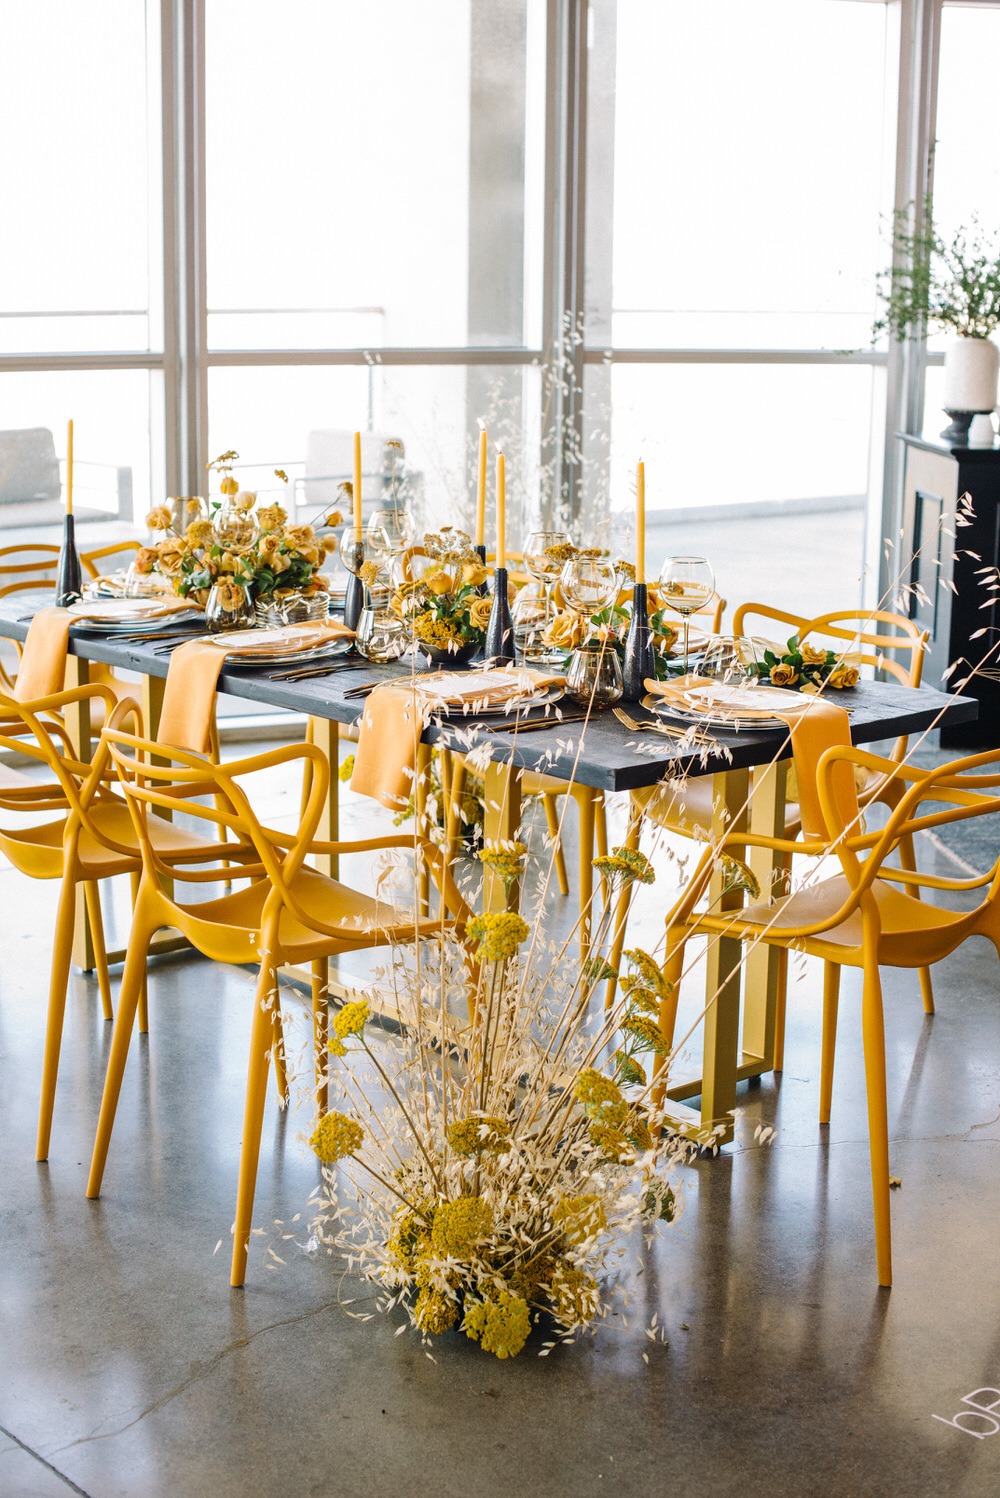 Architectural table design featuring yellow chairs and candles muted by black and gray table top decor. 